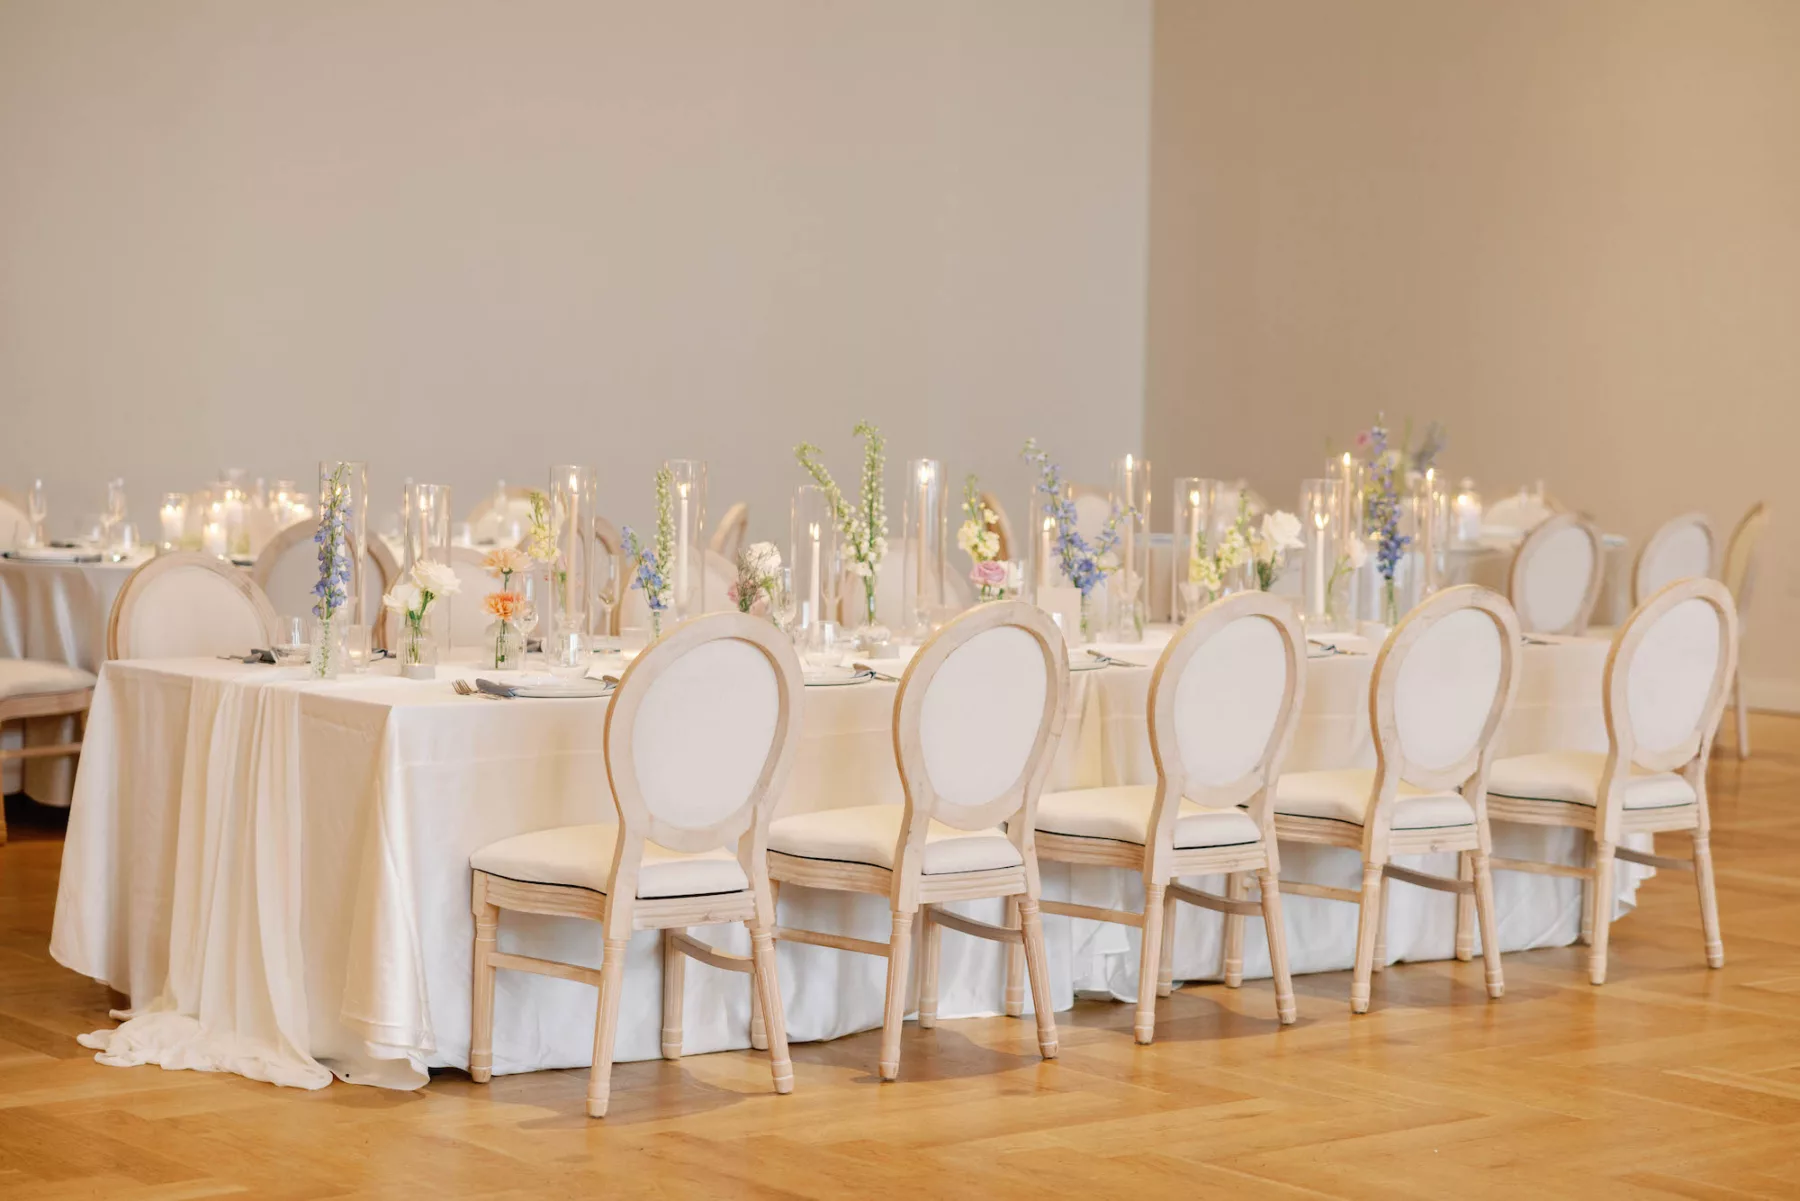 Whimsical Spring Wedding Reception Centerpiece Tablescape Decor Ideas | Blue Lily of the Valley, White Carnations, Pink Chrysanthemums, and Purple Roses in Bud Vases | Tampa Planner The Olive Tree Weddings | Historic Venue Hotel Haya